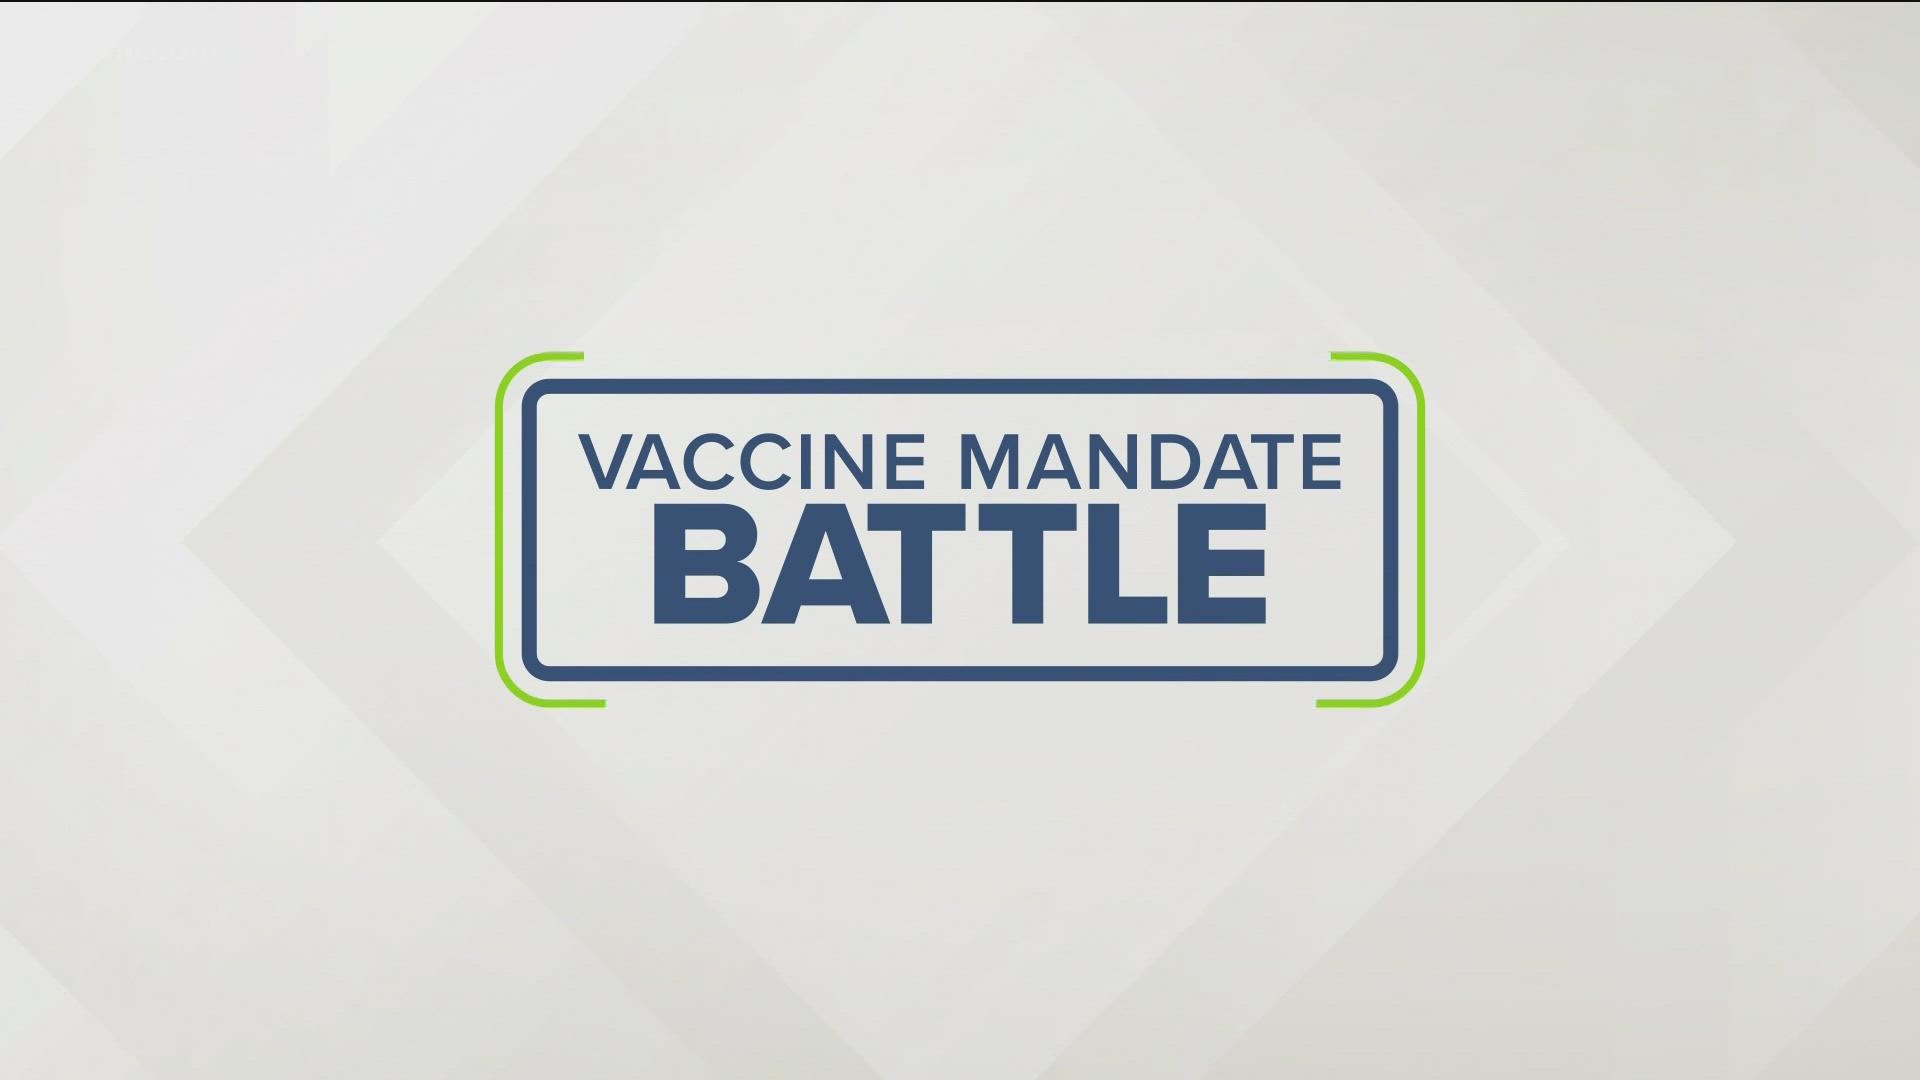 The Supreme Court has stopped a major push by the Biden administration to boost the nation's COVID-19 vaccination rate.